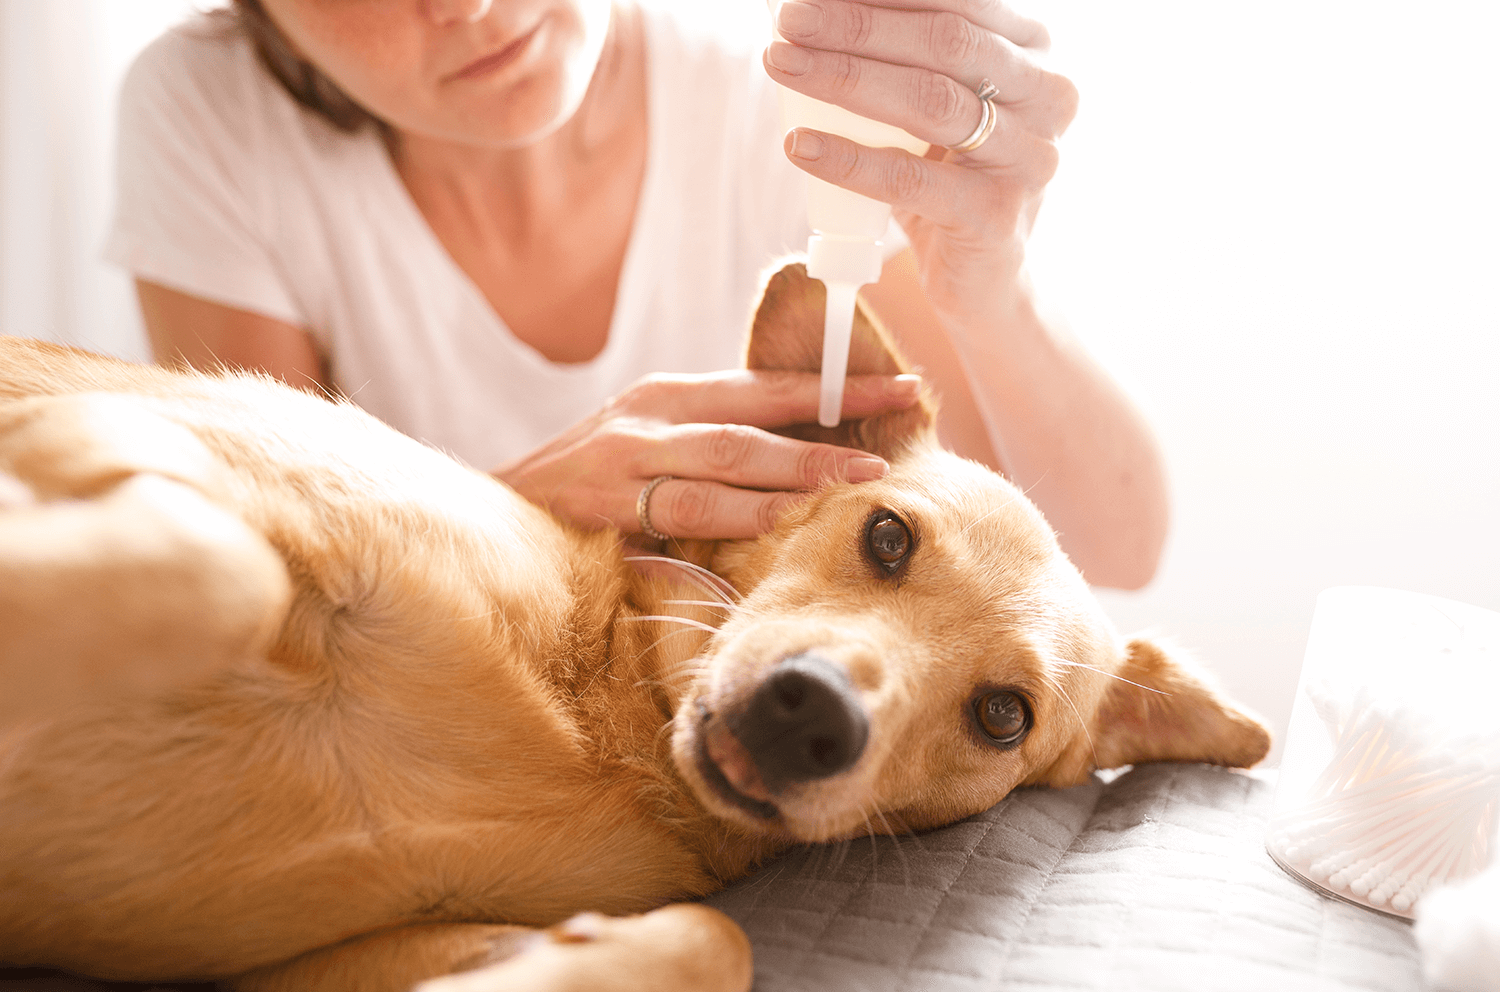 Ear Disease in Dogs and Cats: What You Need to Know